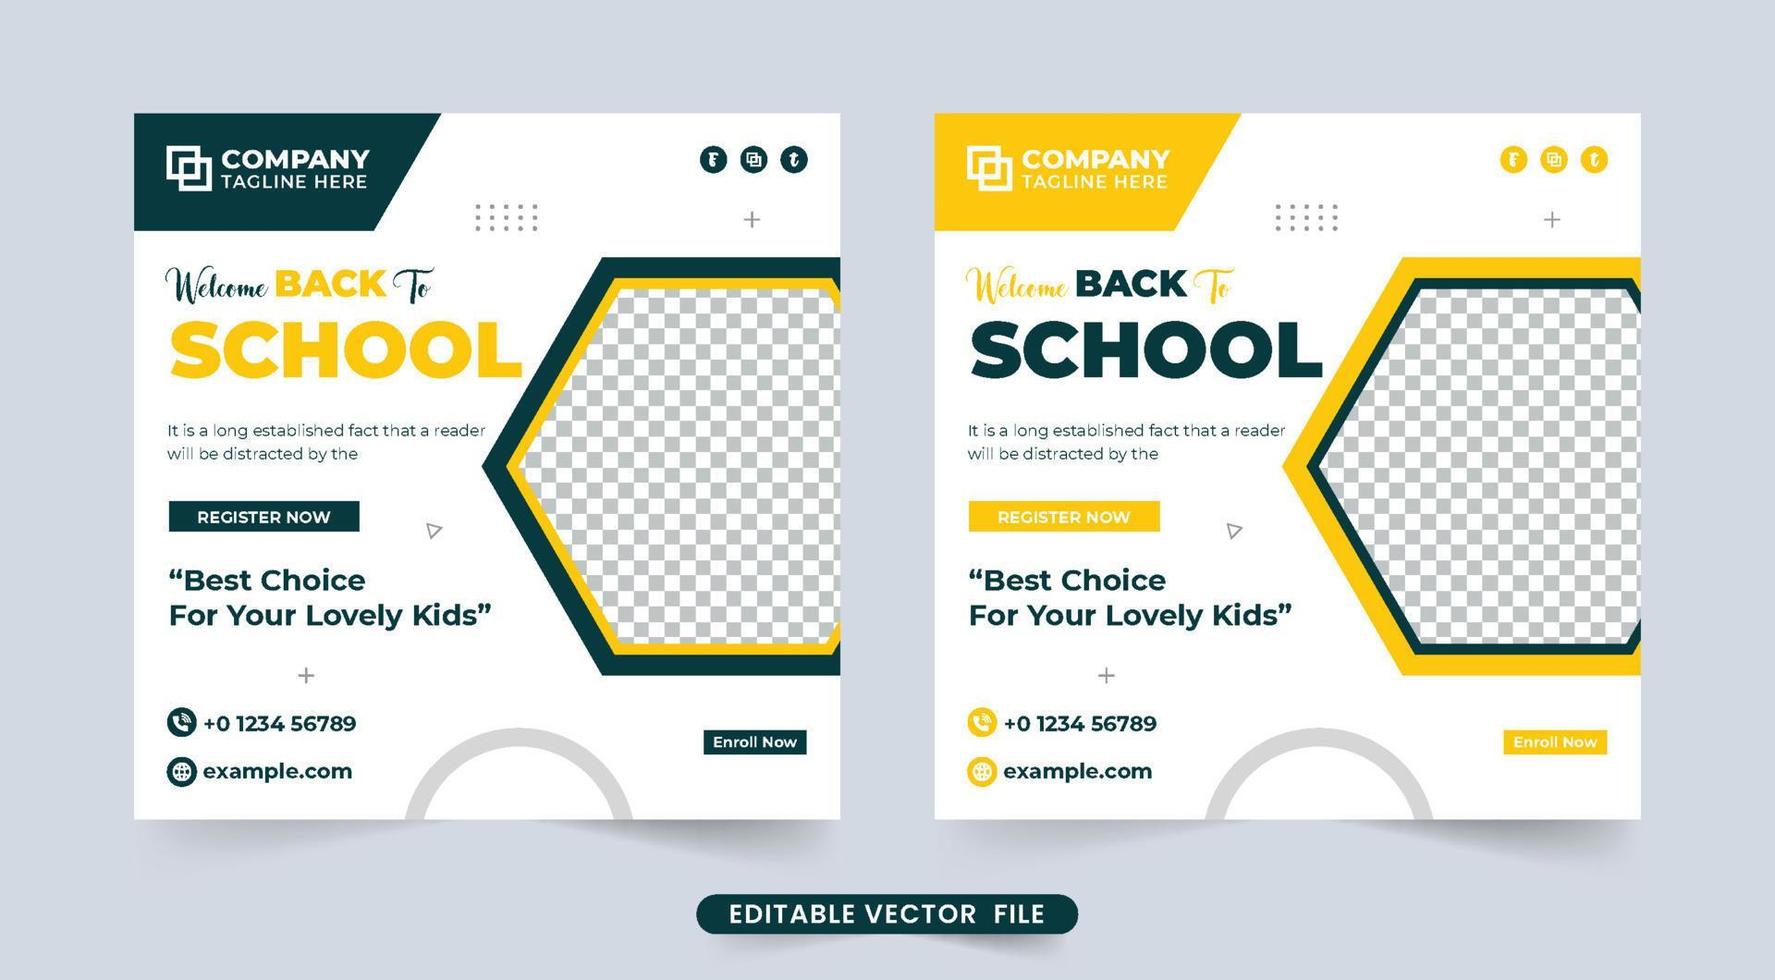 Simple school admission template vector with abstract shapes. Academic course promotion and college advertisement template design on white backgrounds. Back-to-school social media post.